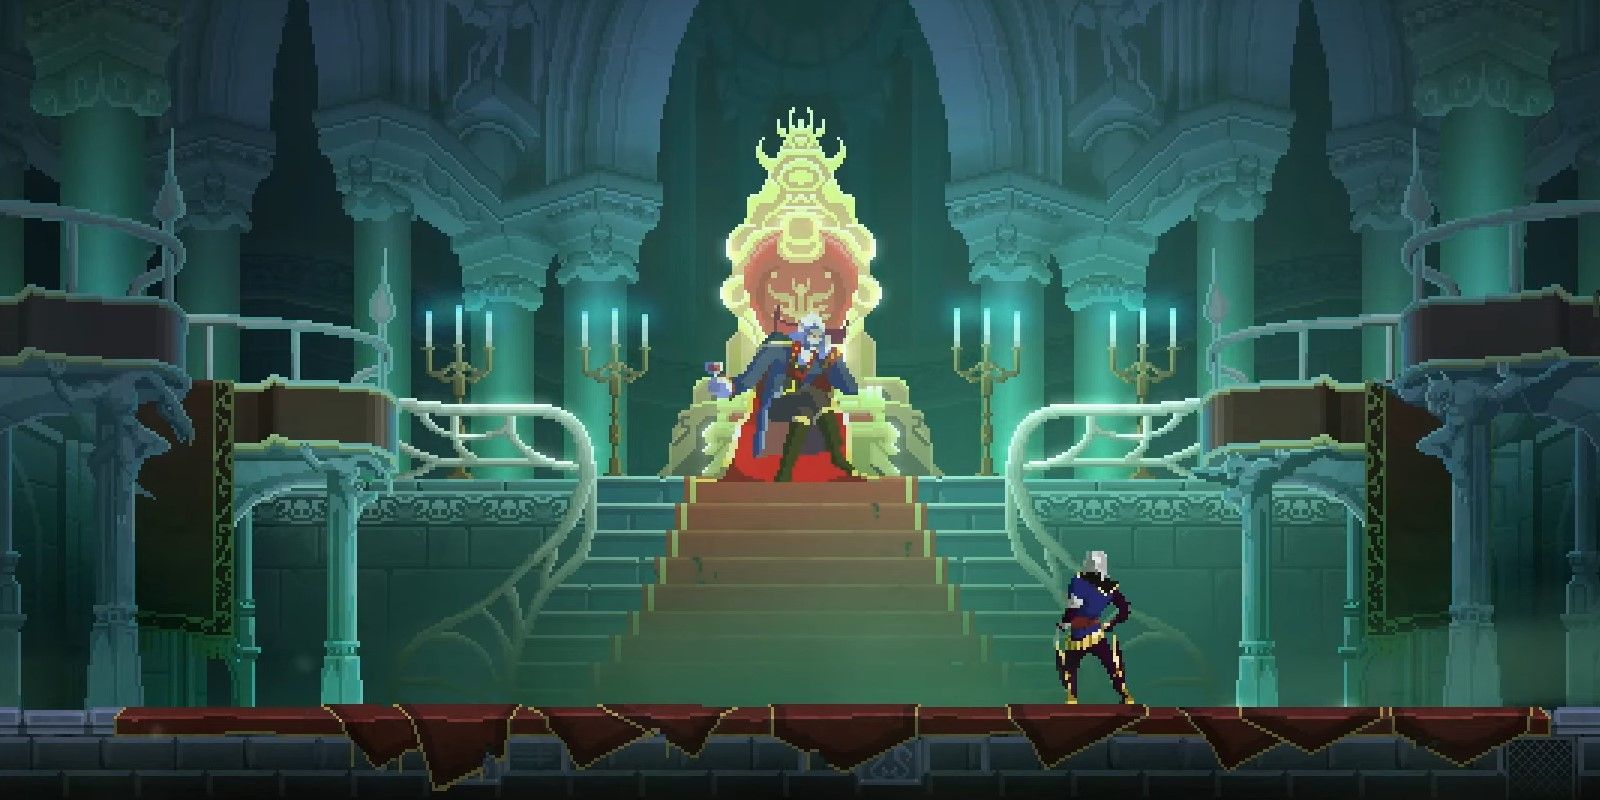 Dead Cells Prisoner in the Hector Outfit as he challenges Dracula